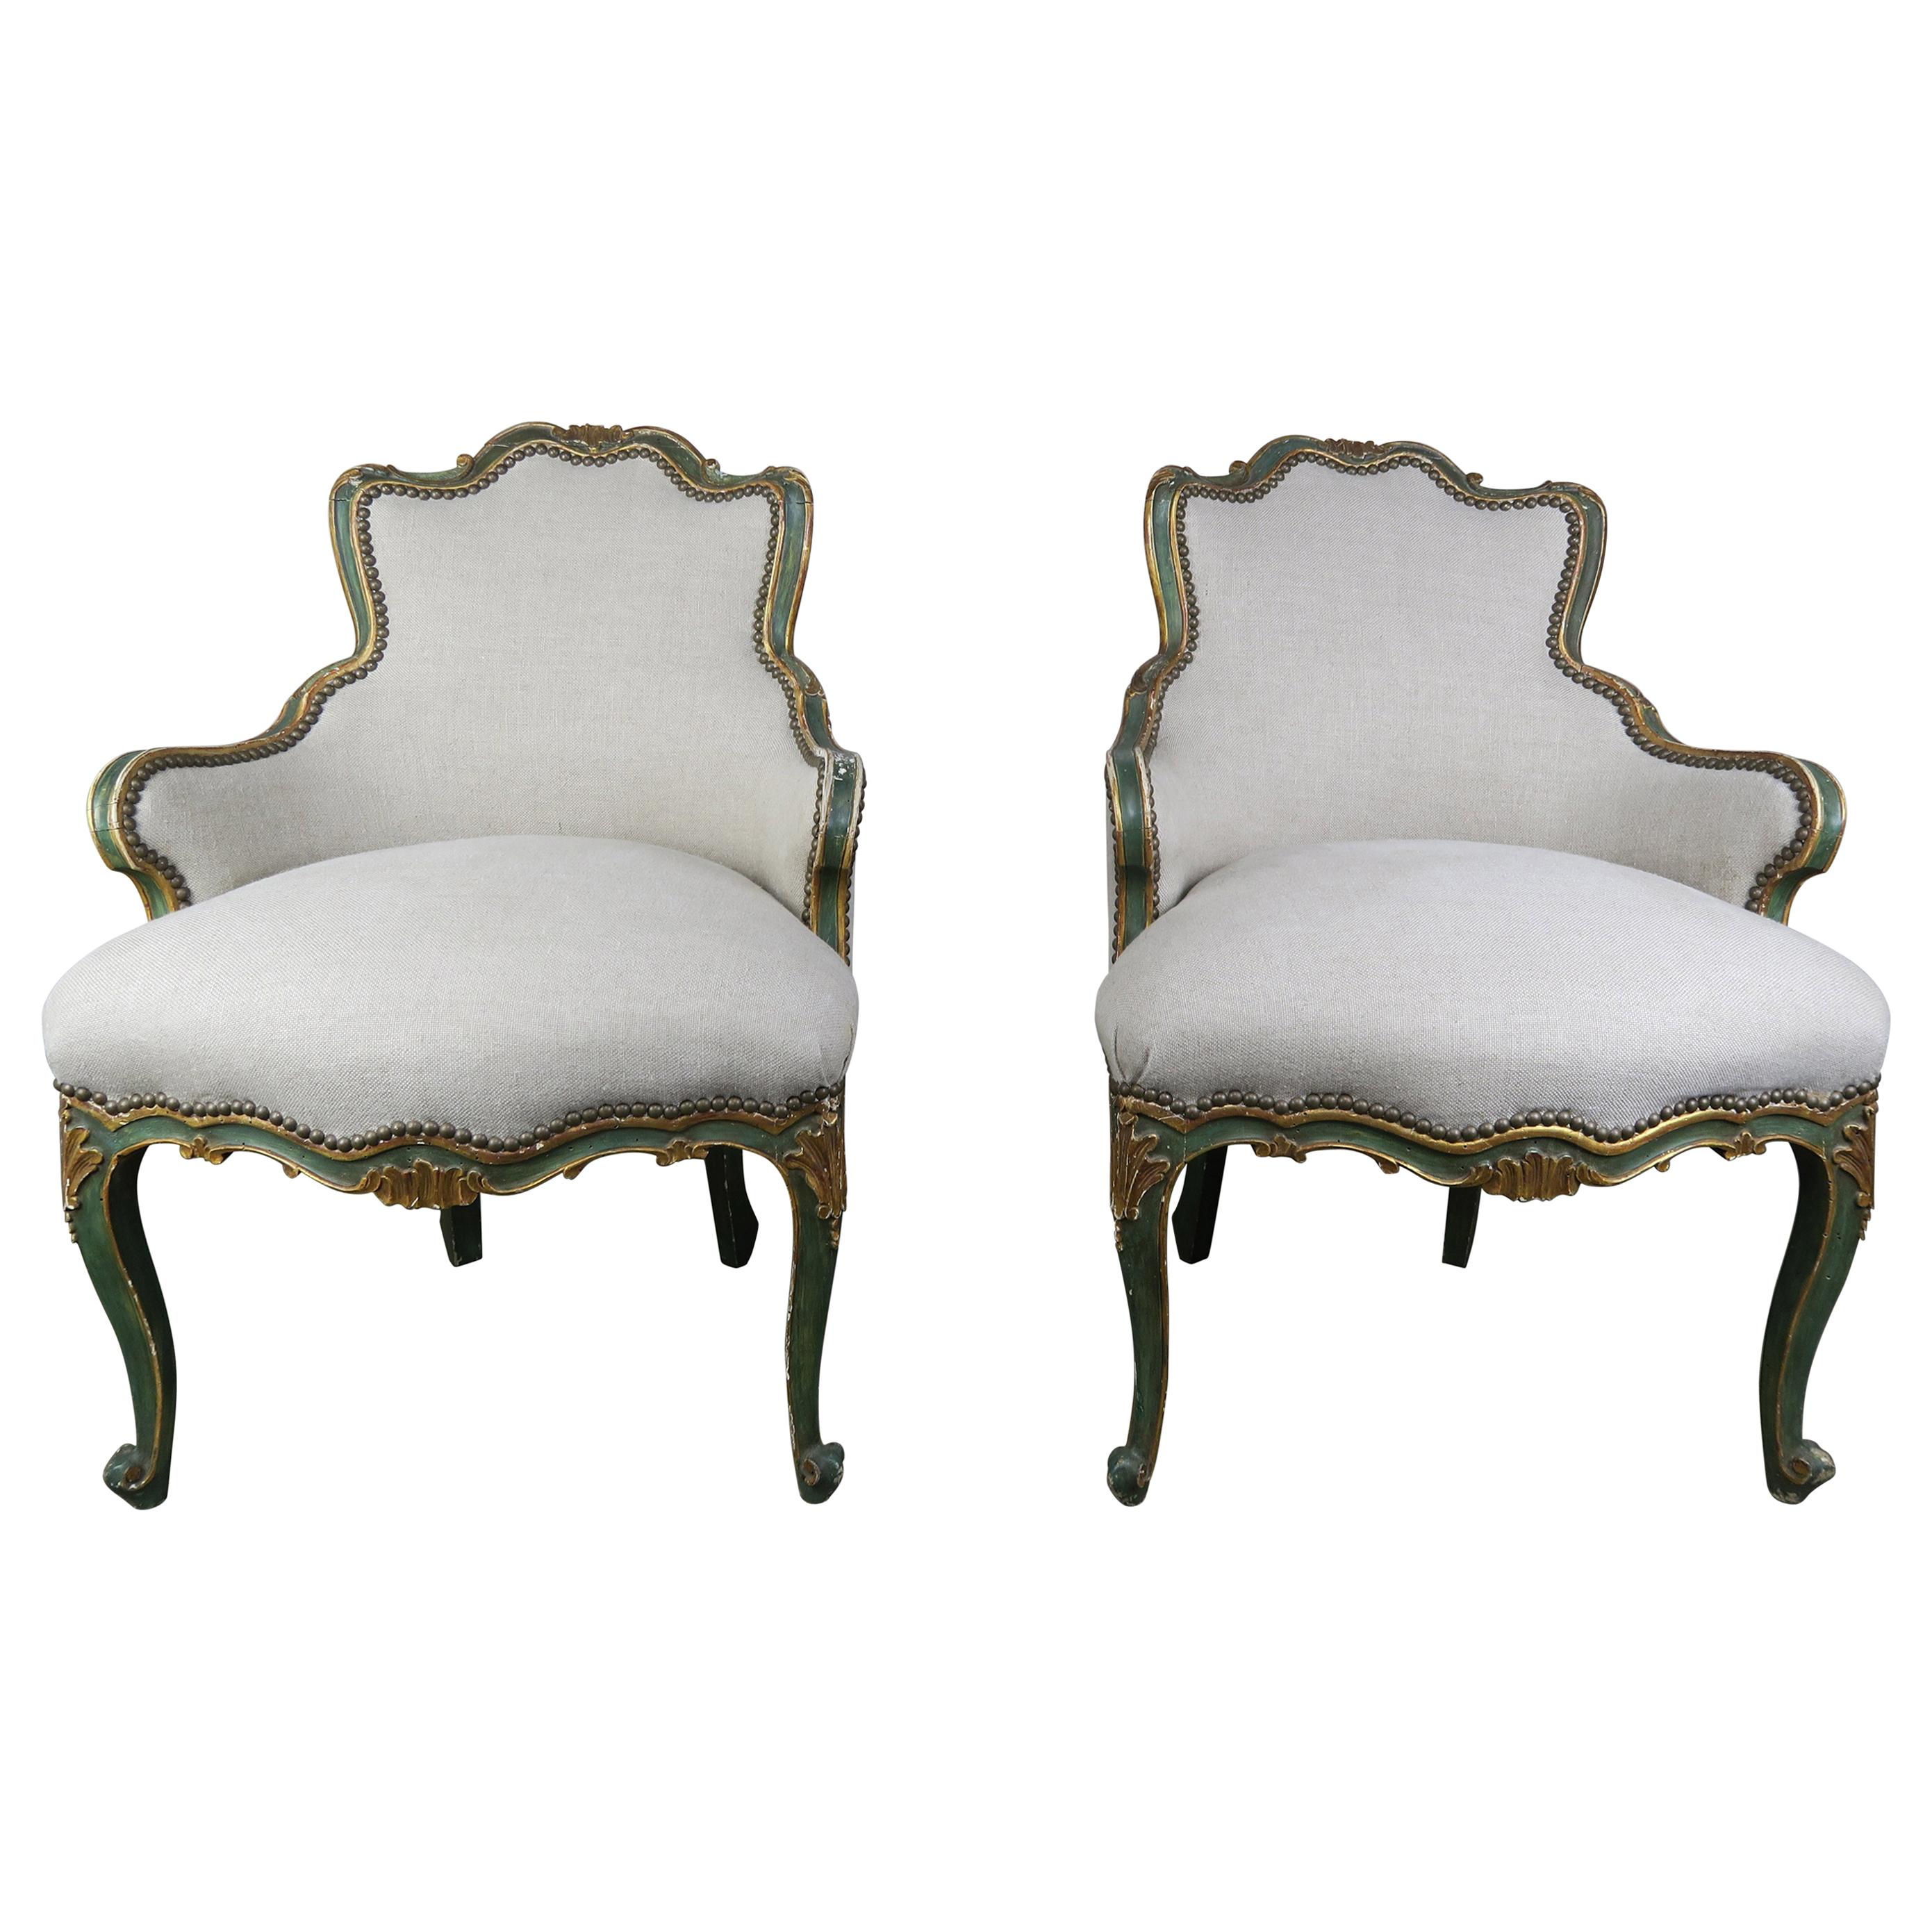 Pair of French Painted and Parcel Gilt Armchairs